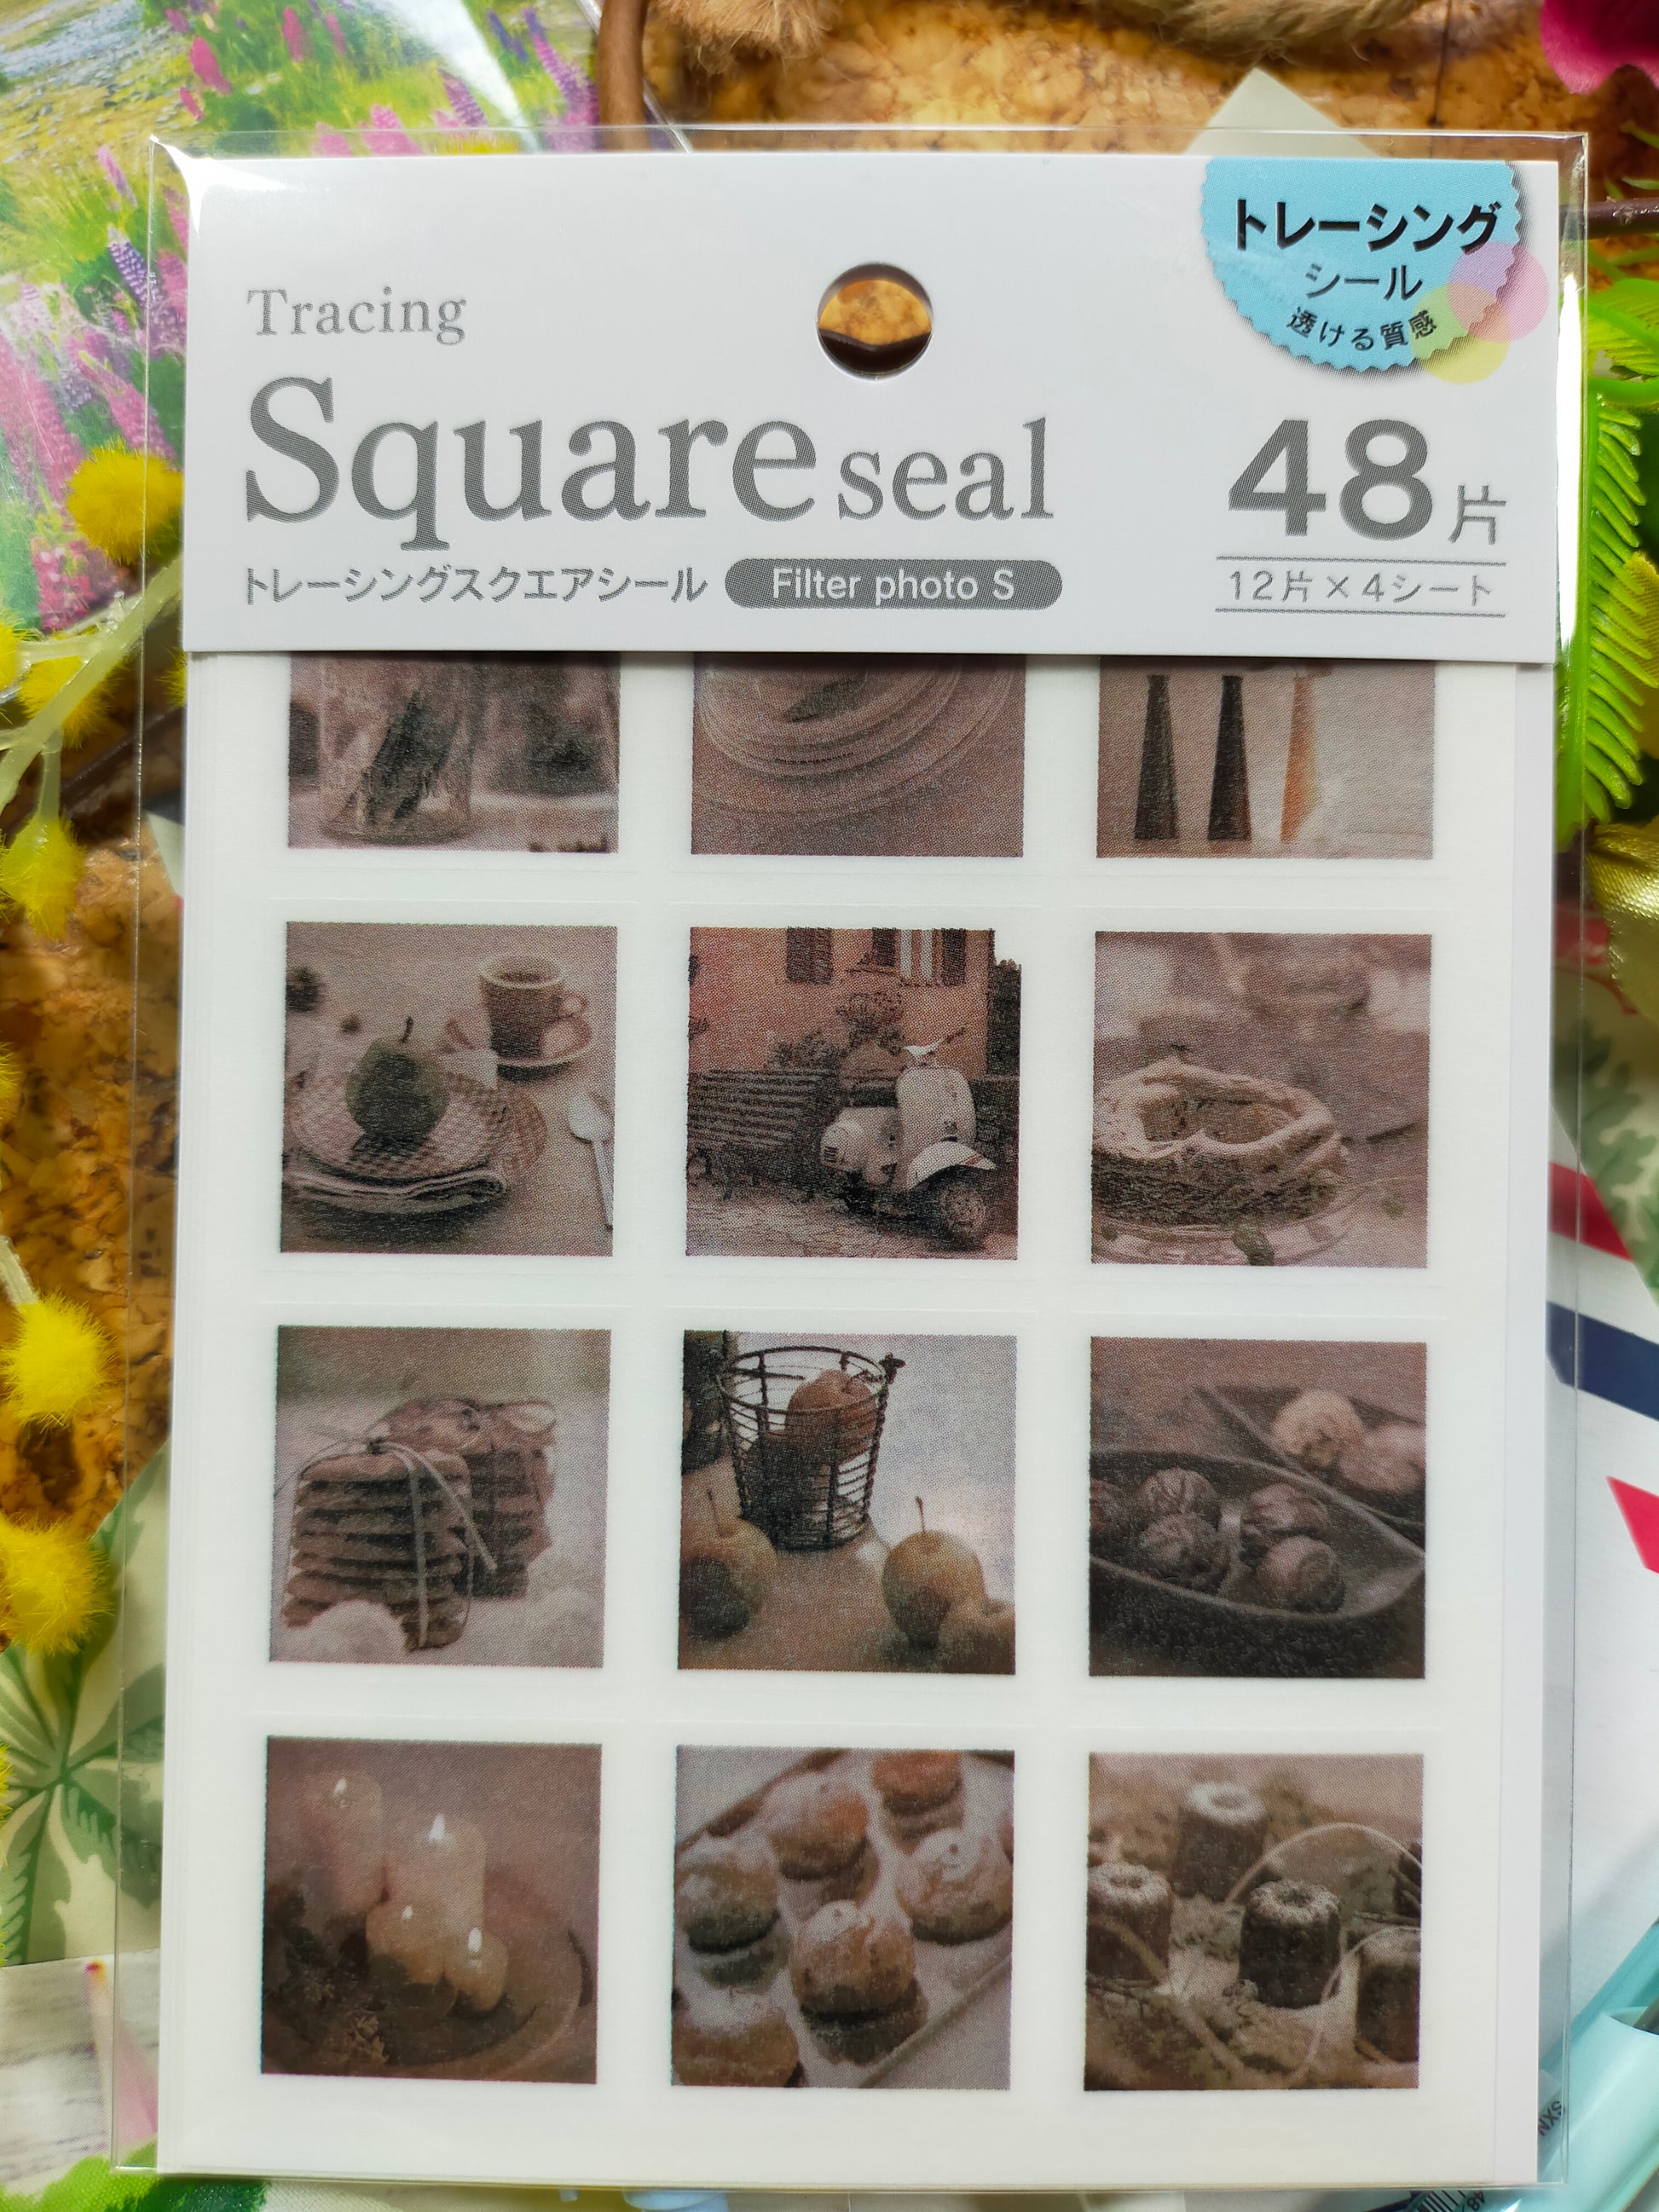 Tracing Square Seal Filter photo ,Kyowa_ Red 48p / Blue 48p / Brown 48p